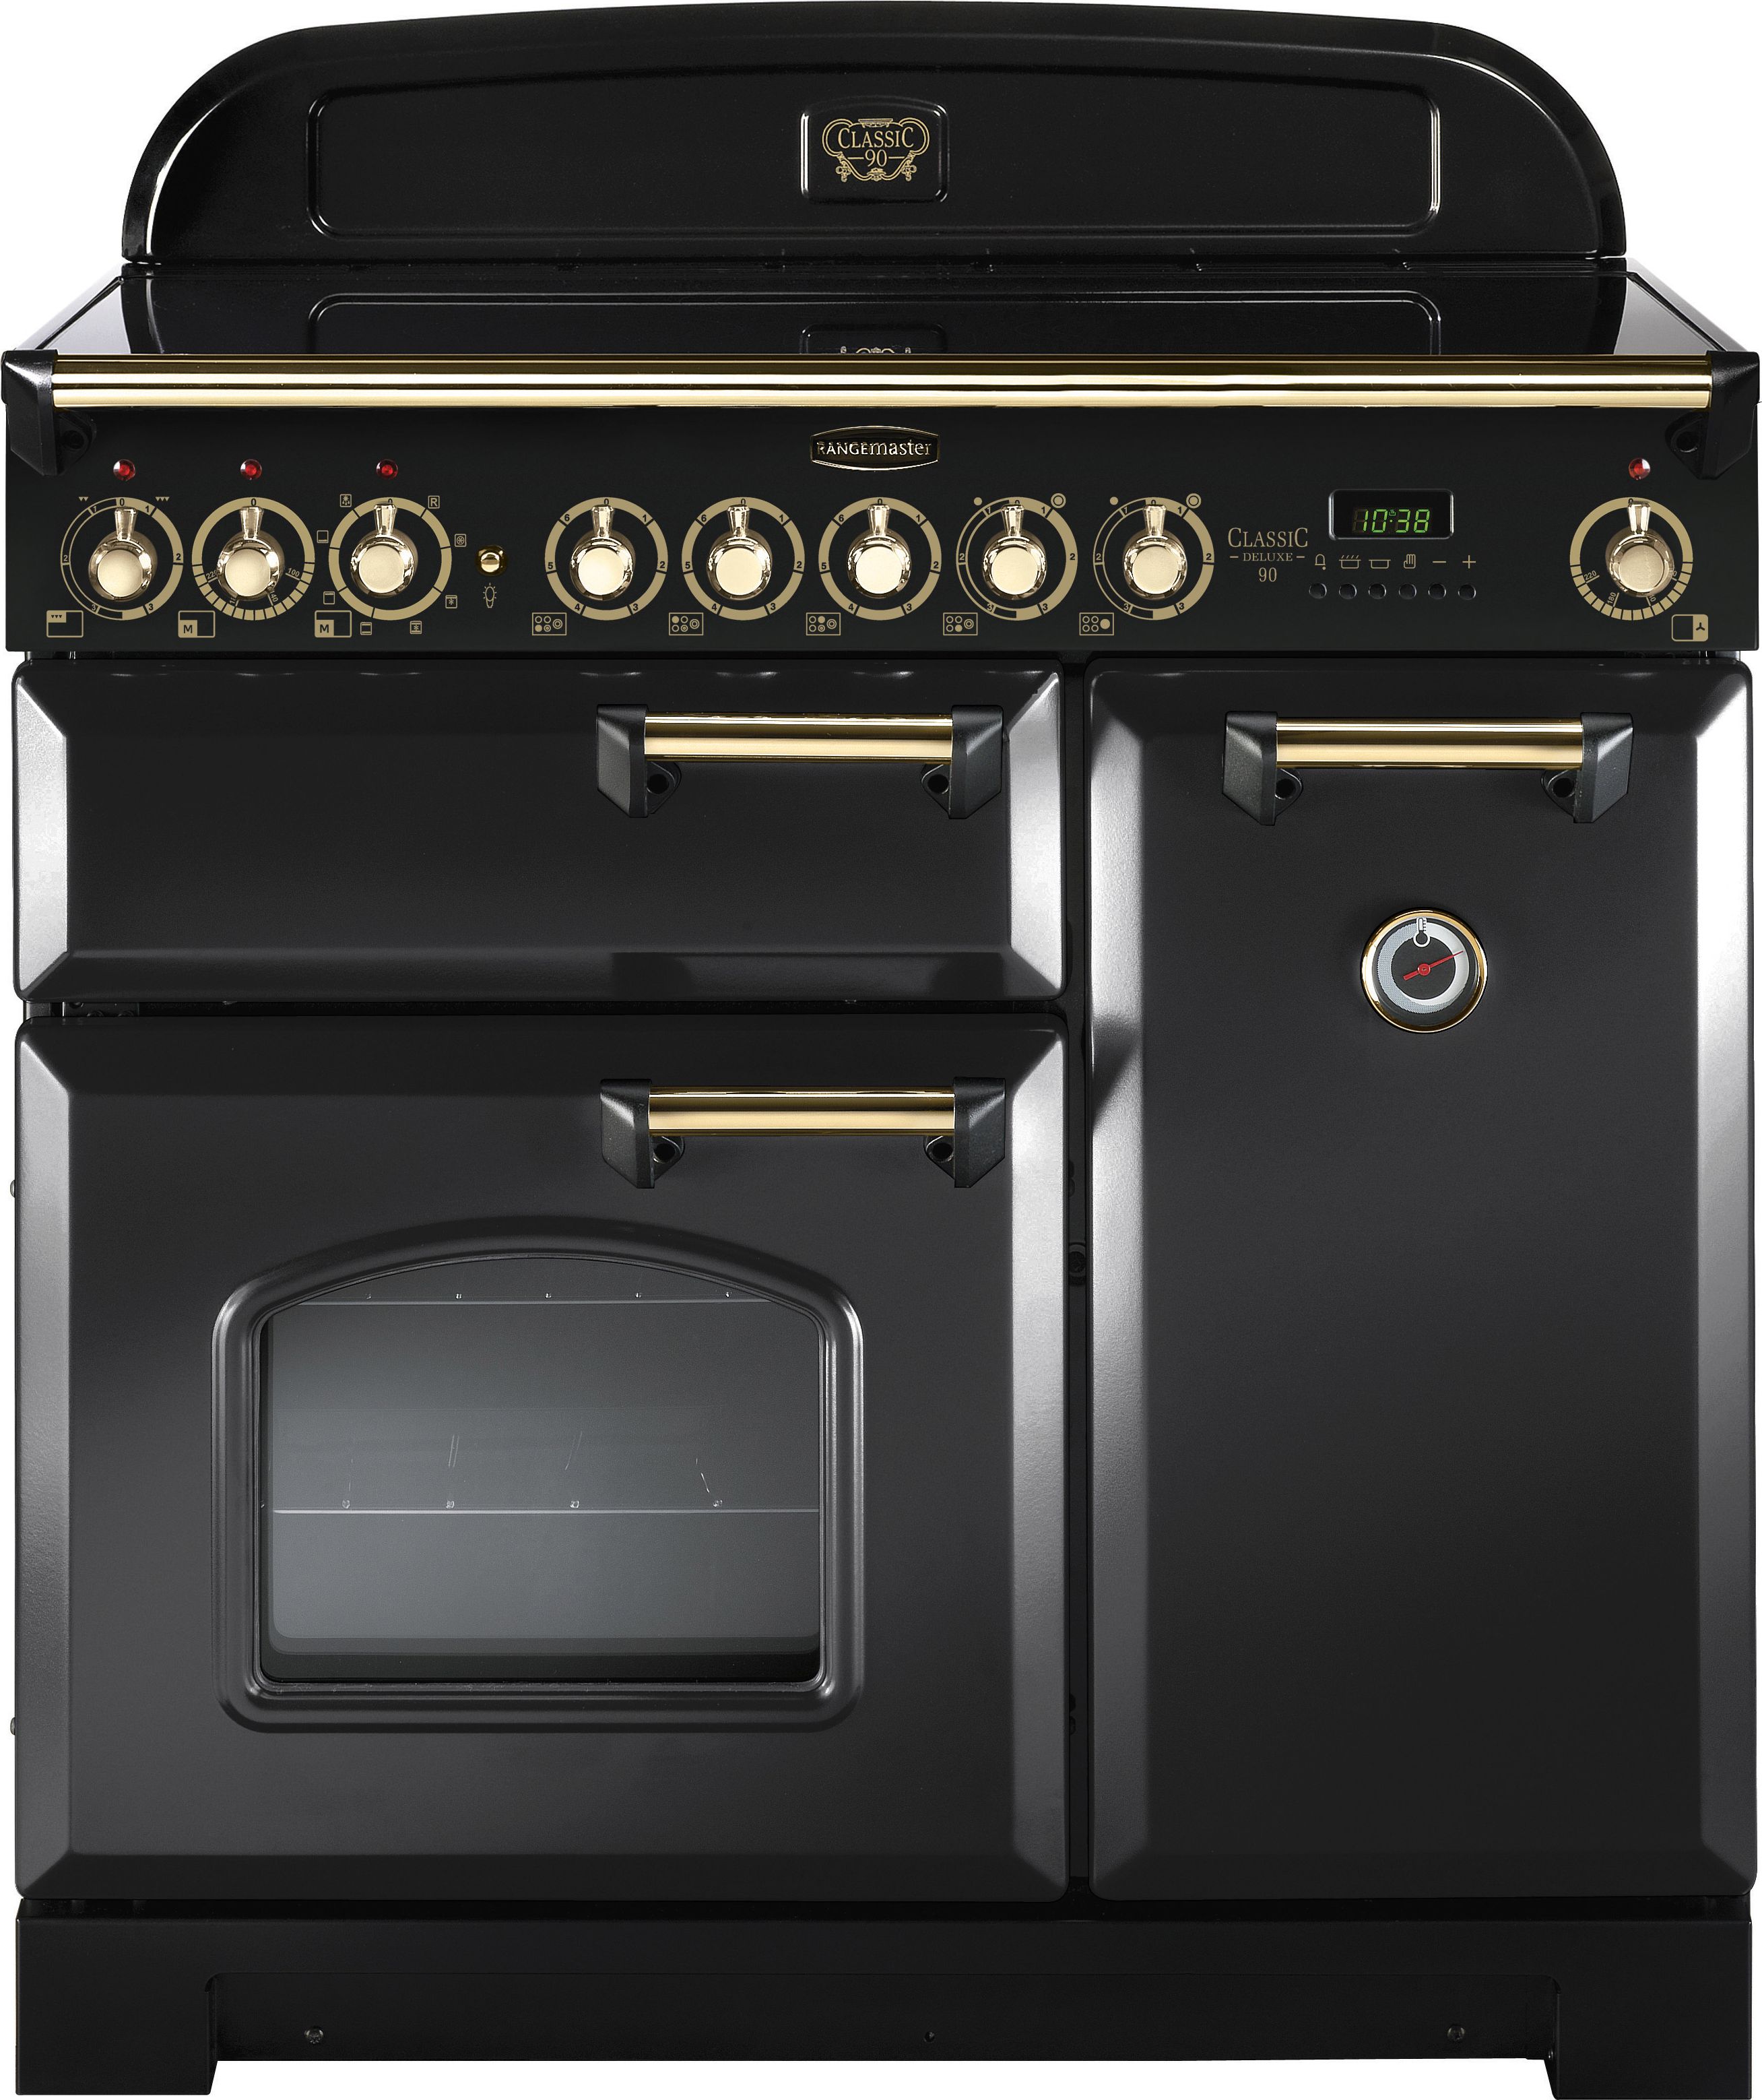 Rangemaster Classic Deluxe CDL90ECCB/B 90cm Electric Range Cooker with Ceramic Hob - Charcoal Black / Brass - A/A Rated, Black